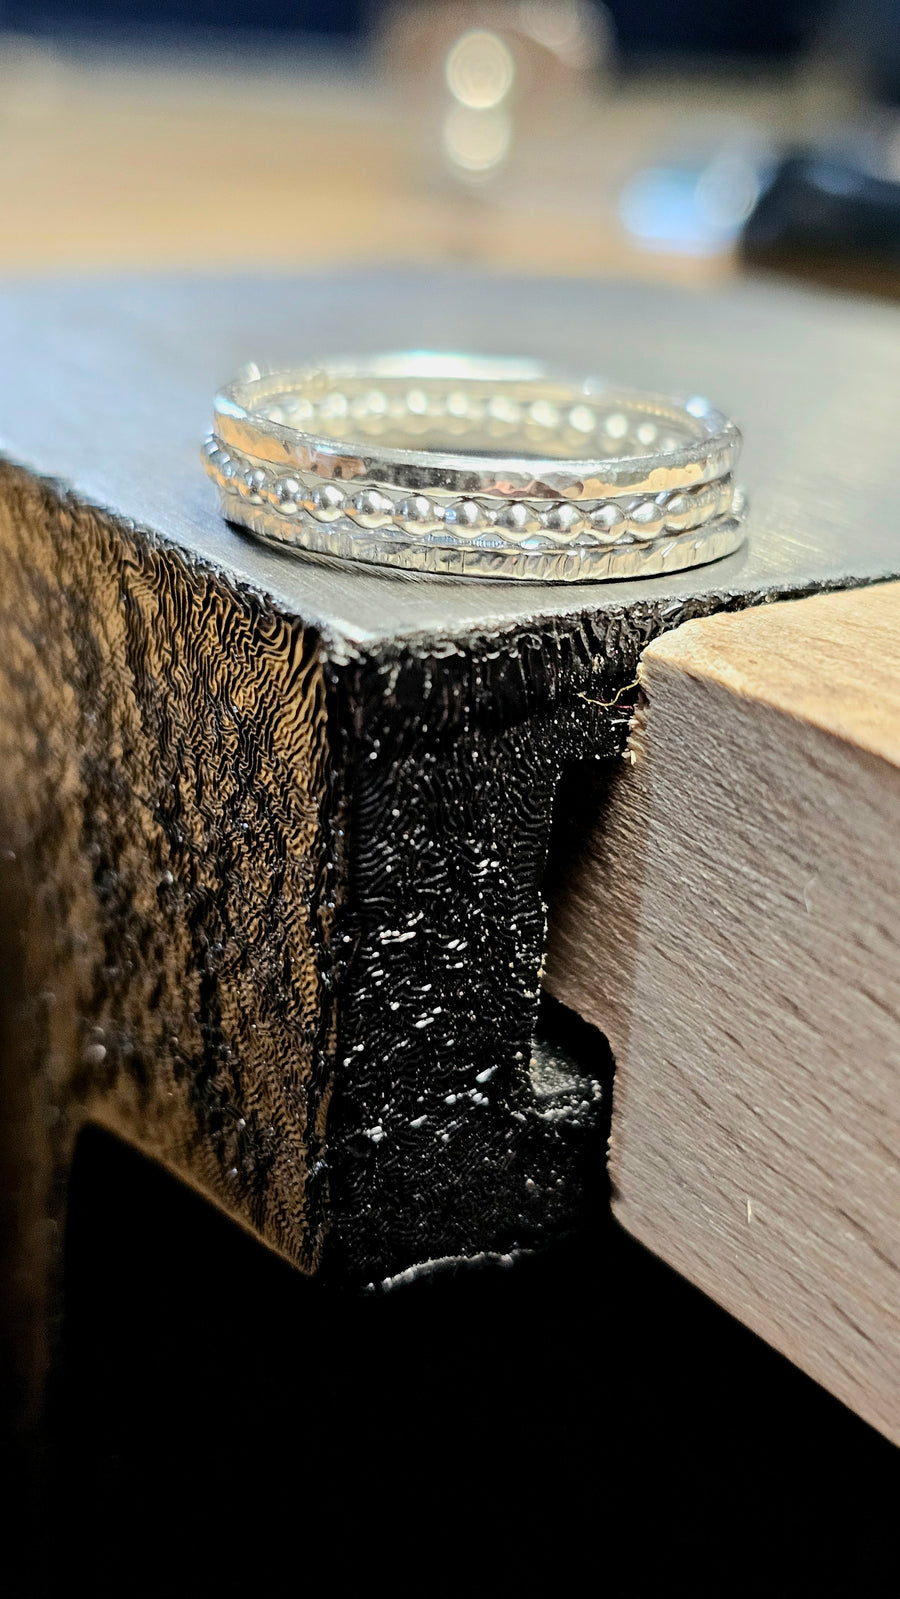 Jewellery Making Experience - Gift Voucher -  Stacking Ring Class